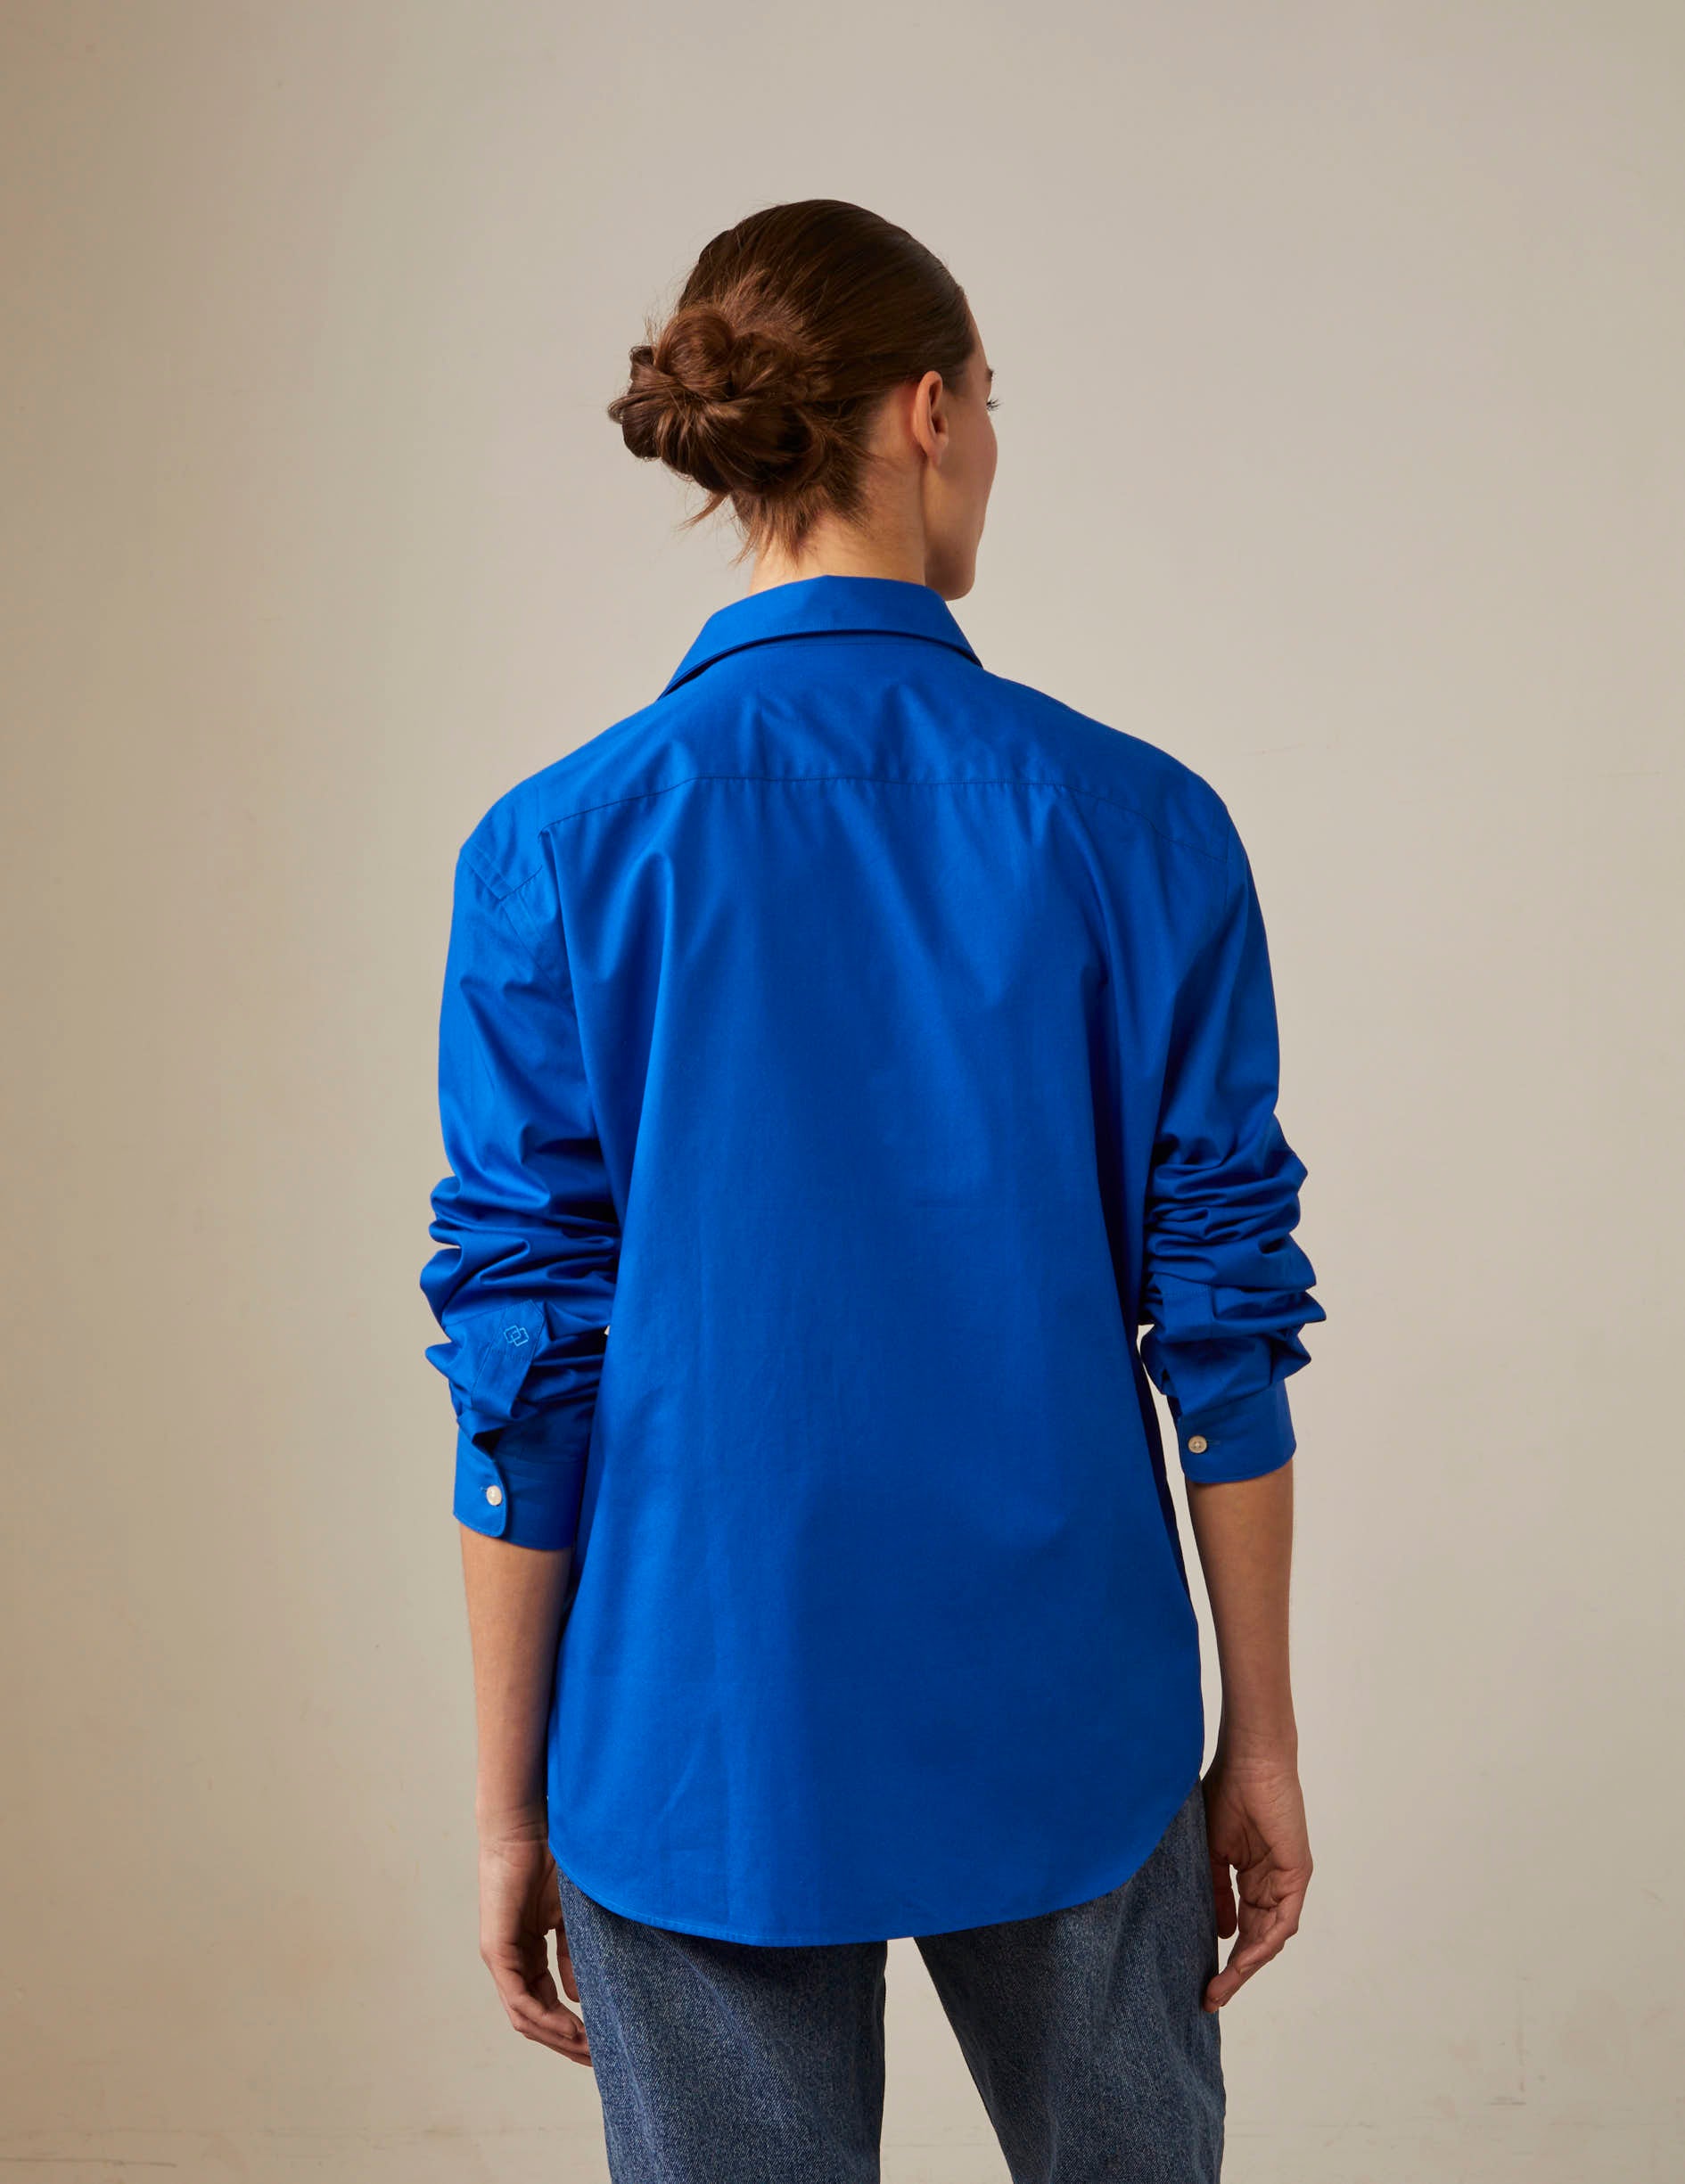 Blue "Je t'aime" shirt with white embroidery - Poplin - Figaret Collar